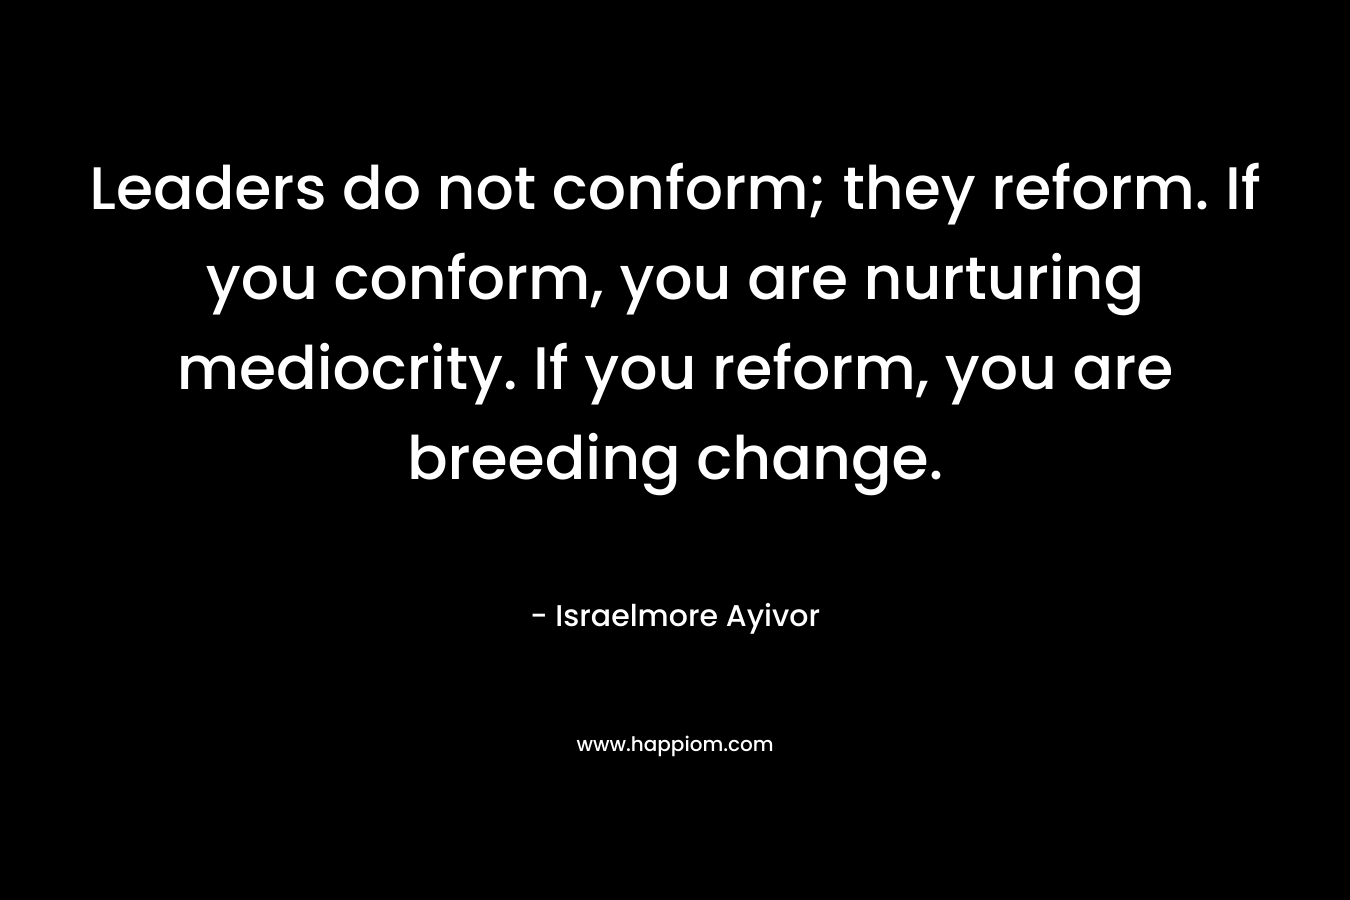 Leaders do not conform; they reform. If you conform, you are nurturing mediocrity. If you reform, you are breeding change. – Israelmore Ayivor